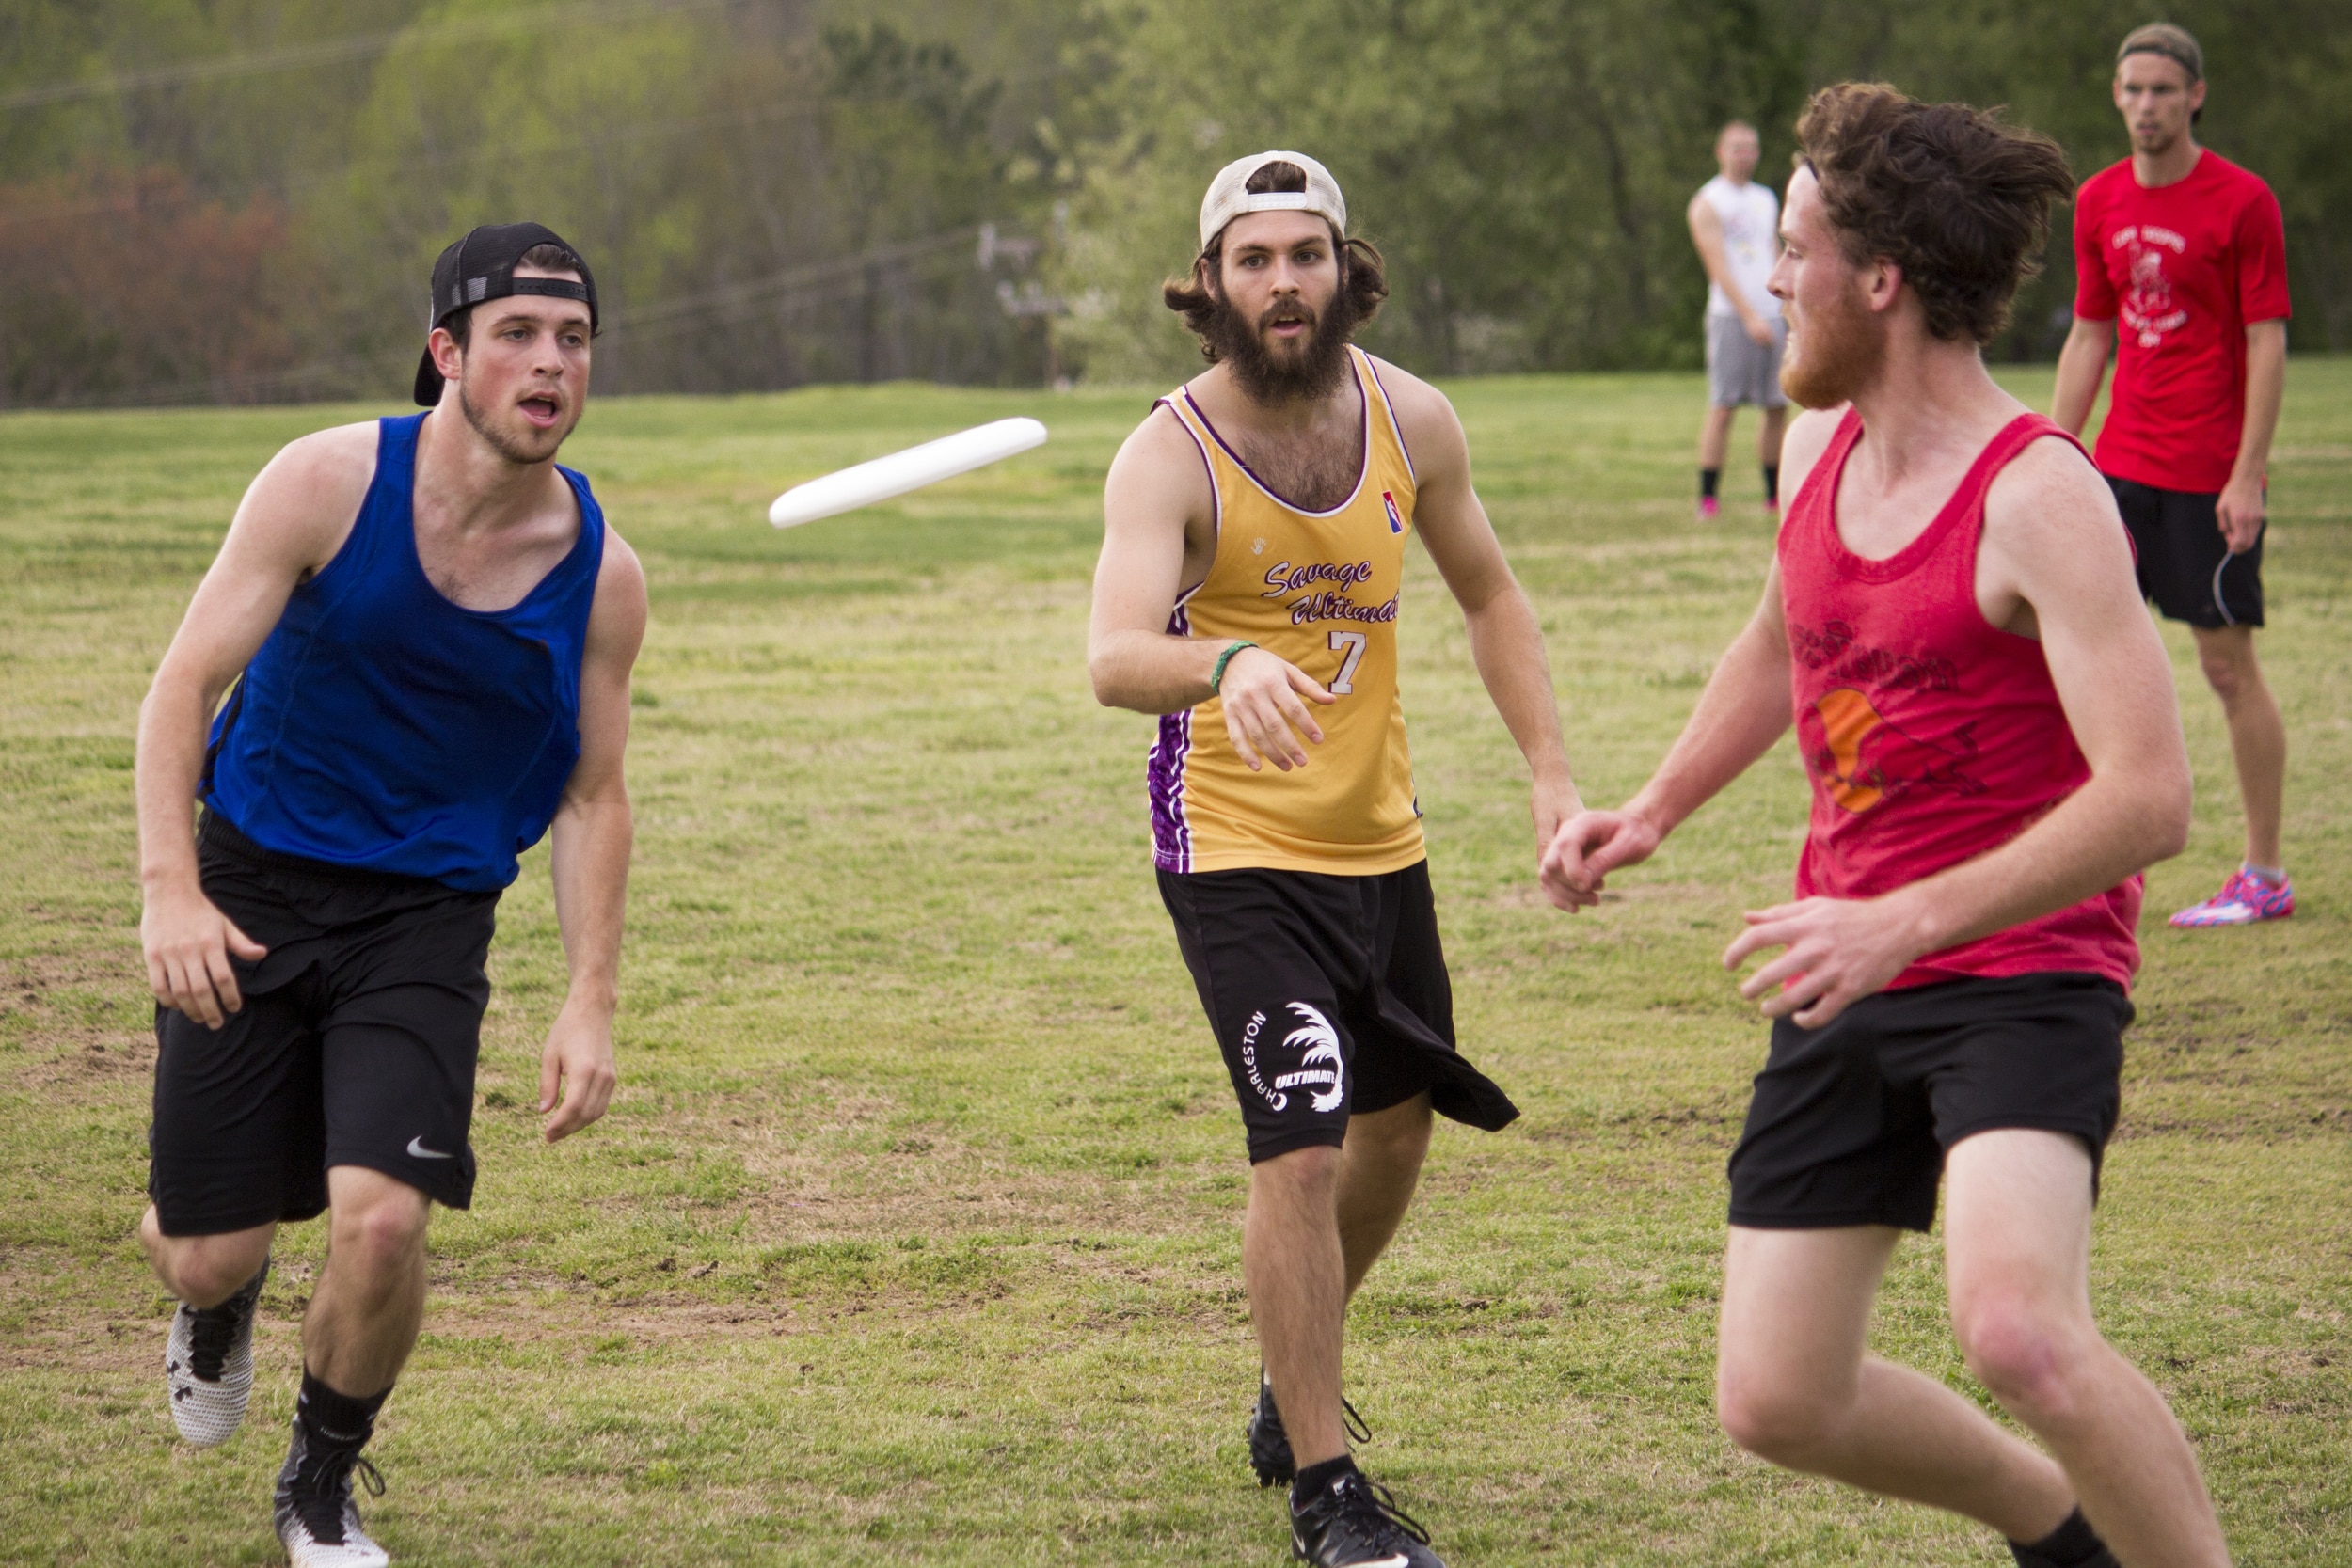  Three players race to the frisbee to&nbsp;obtain possession of&nbsp;it for their team.&nbsp; 